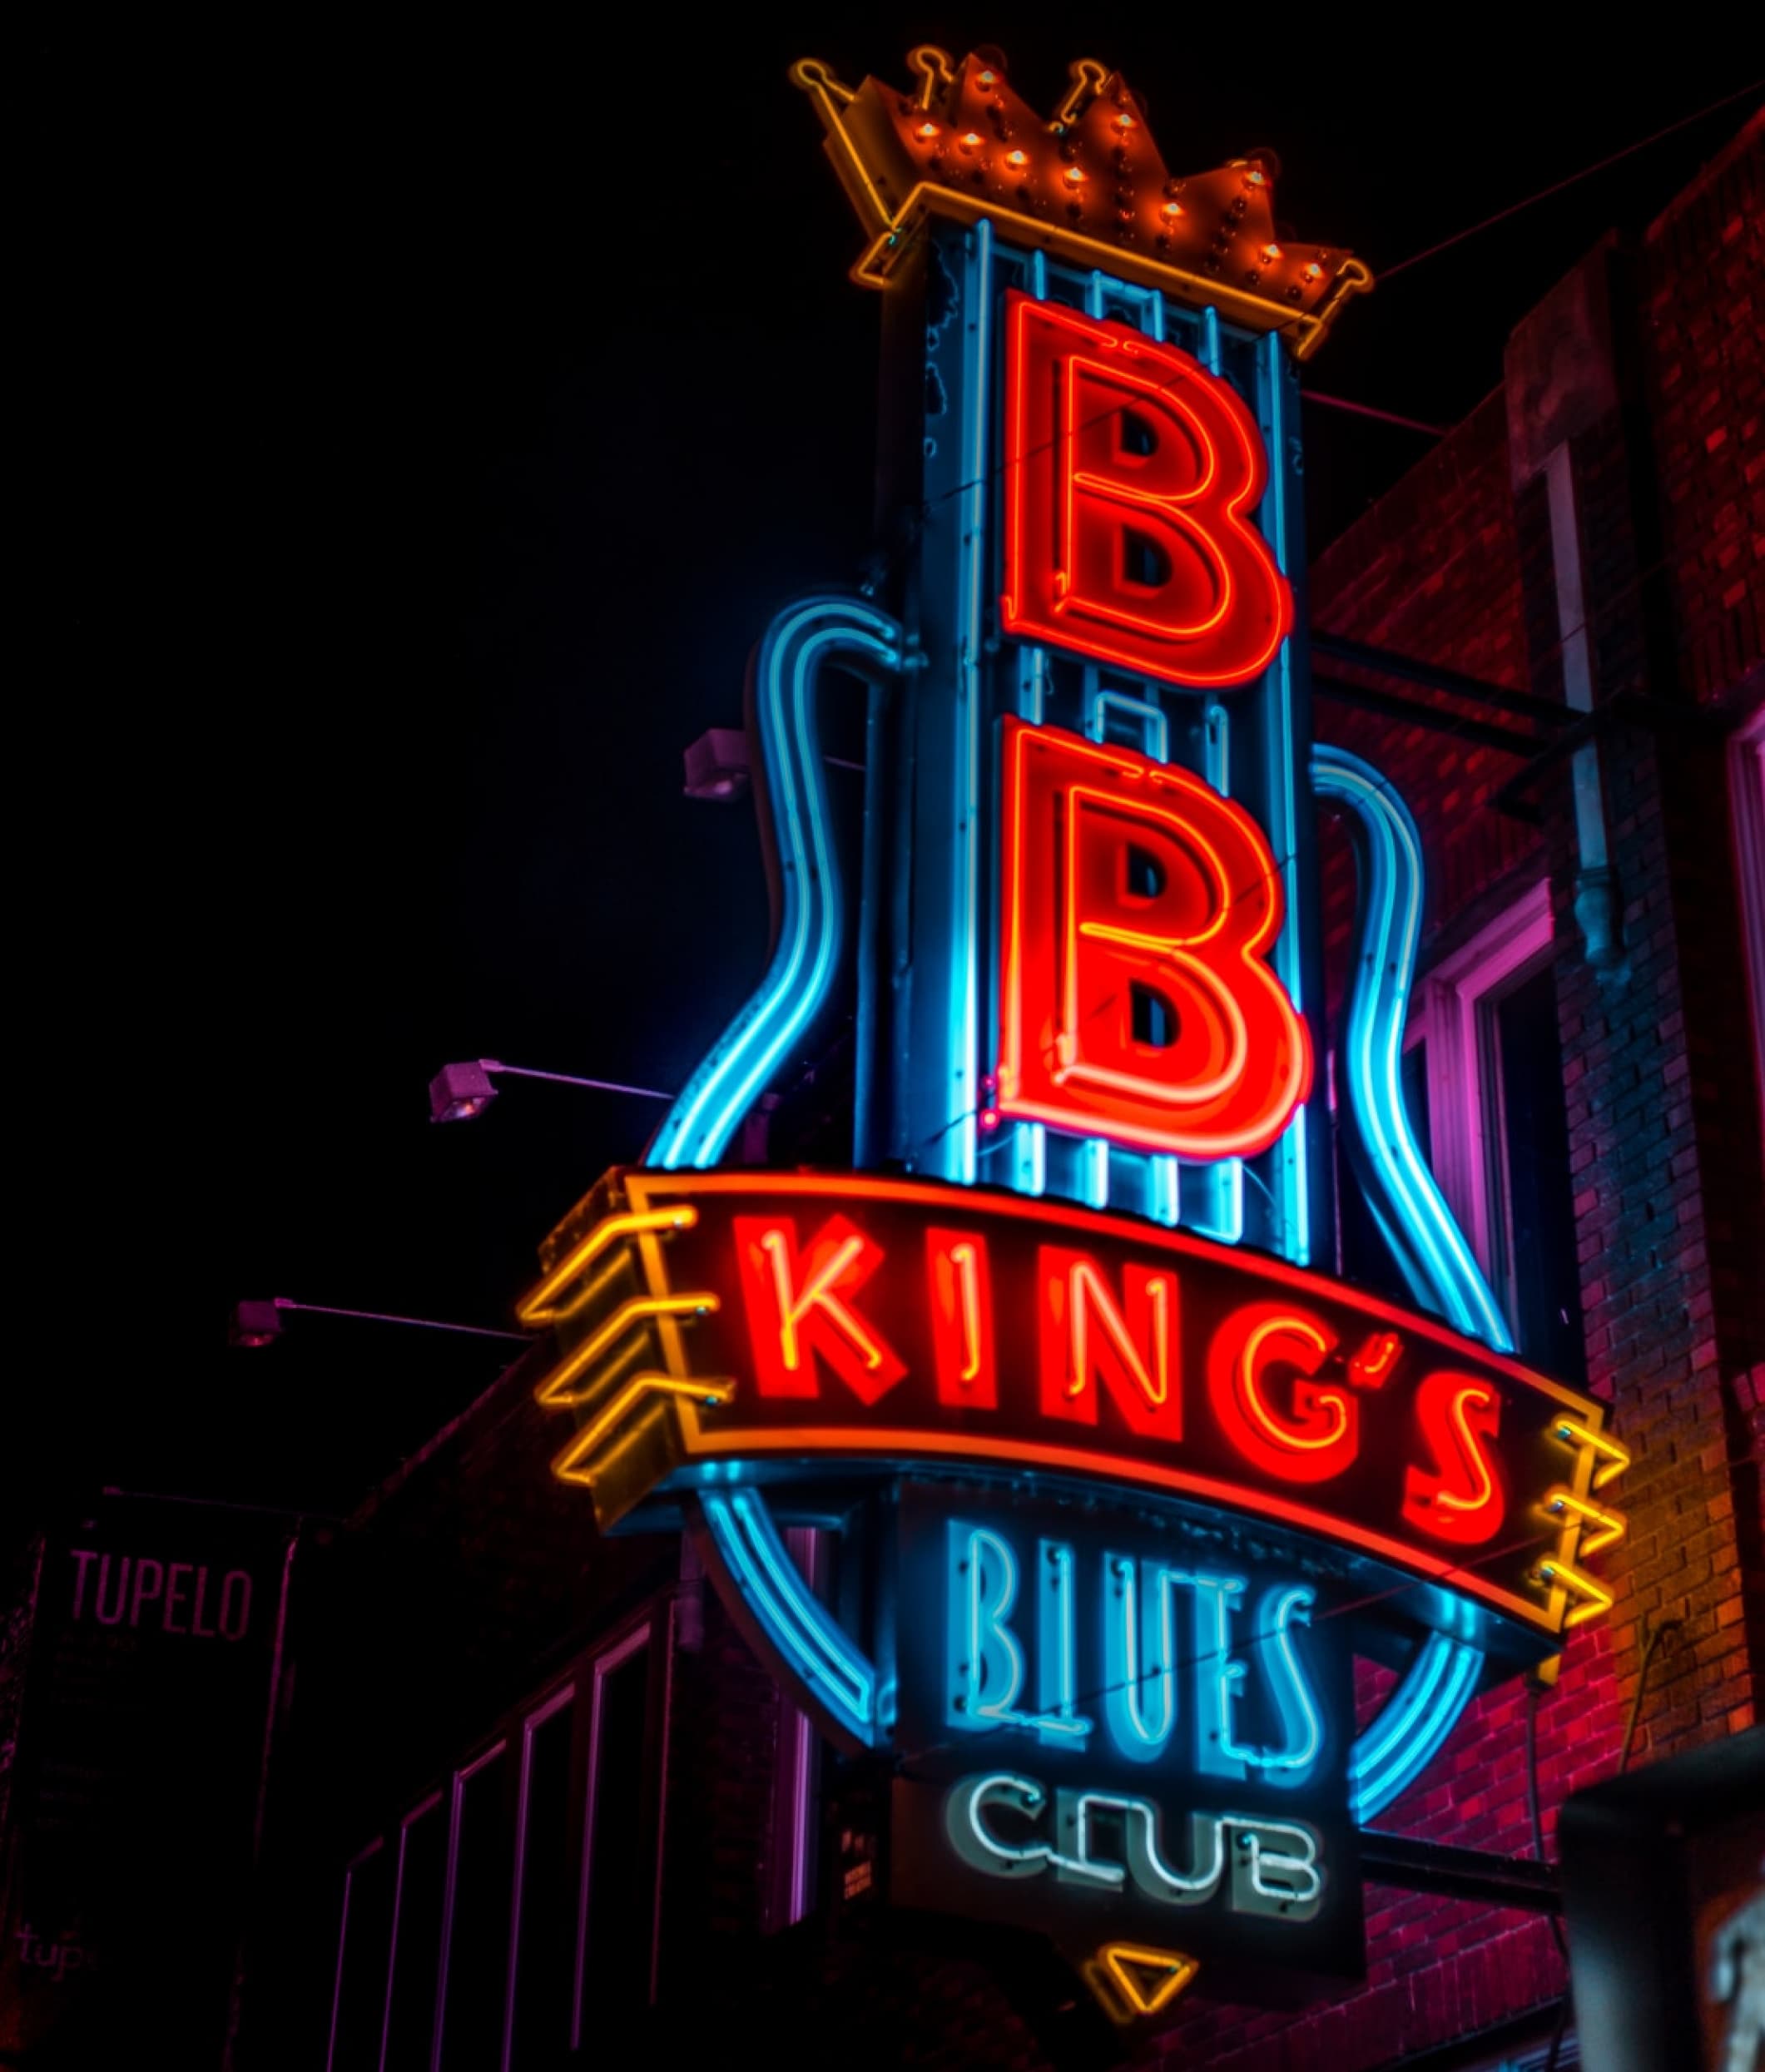 Blues club sign in Memphis